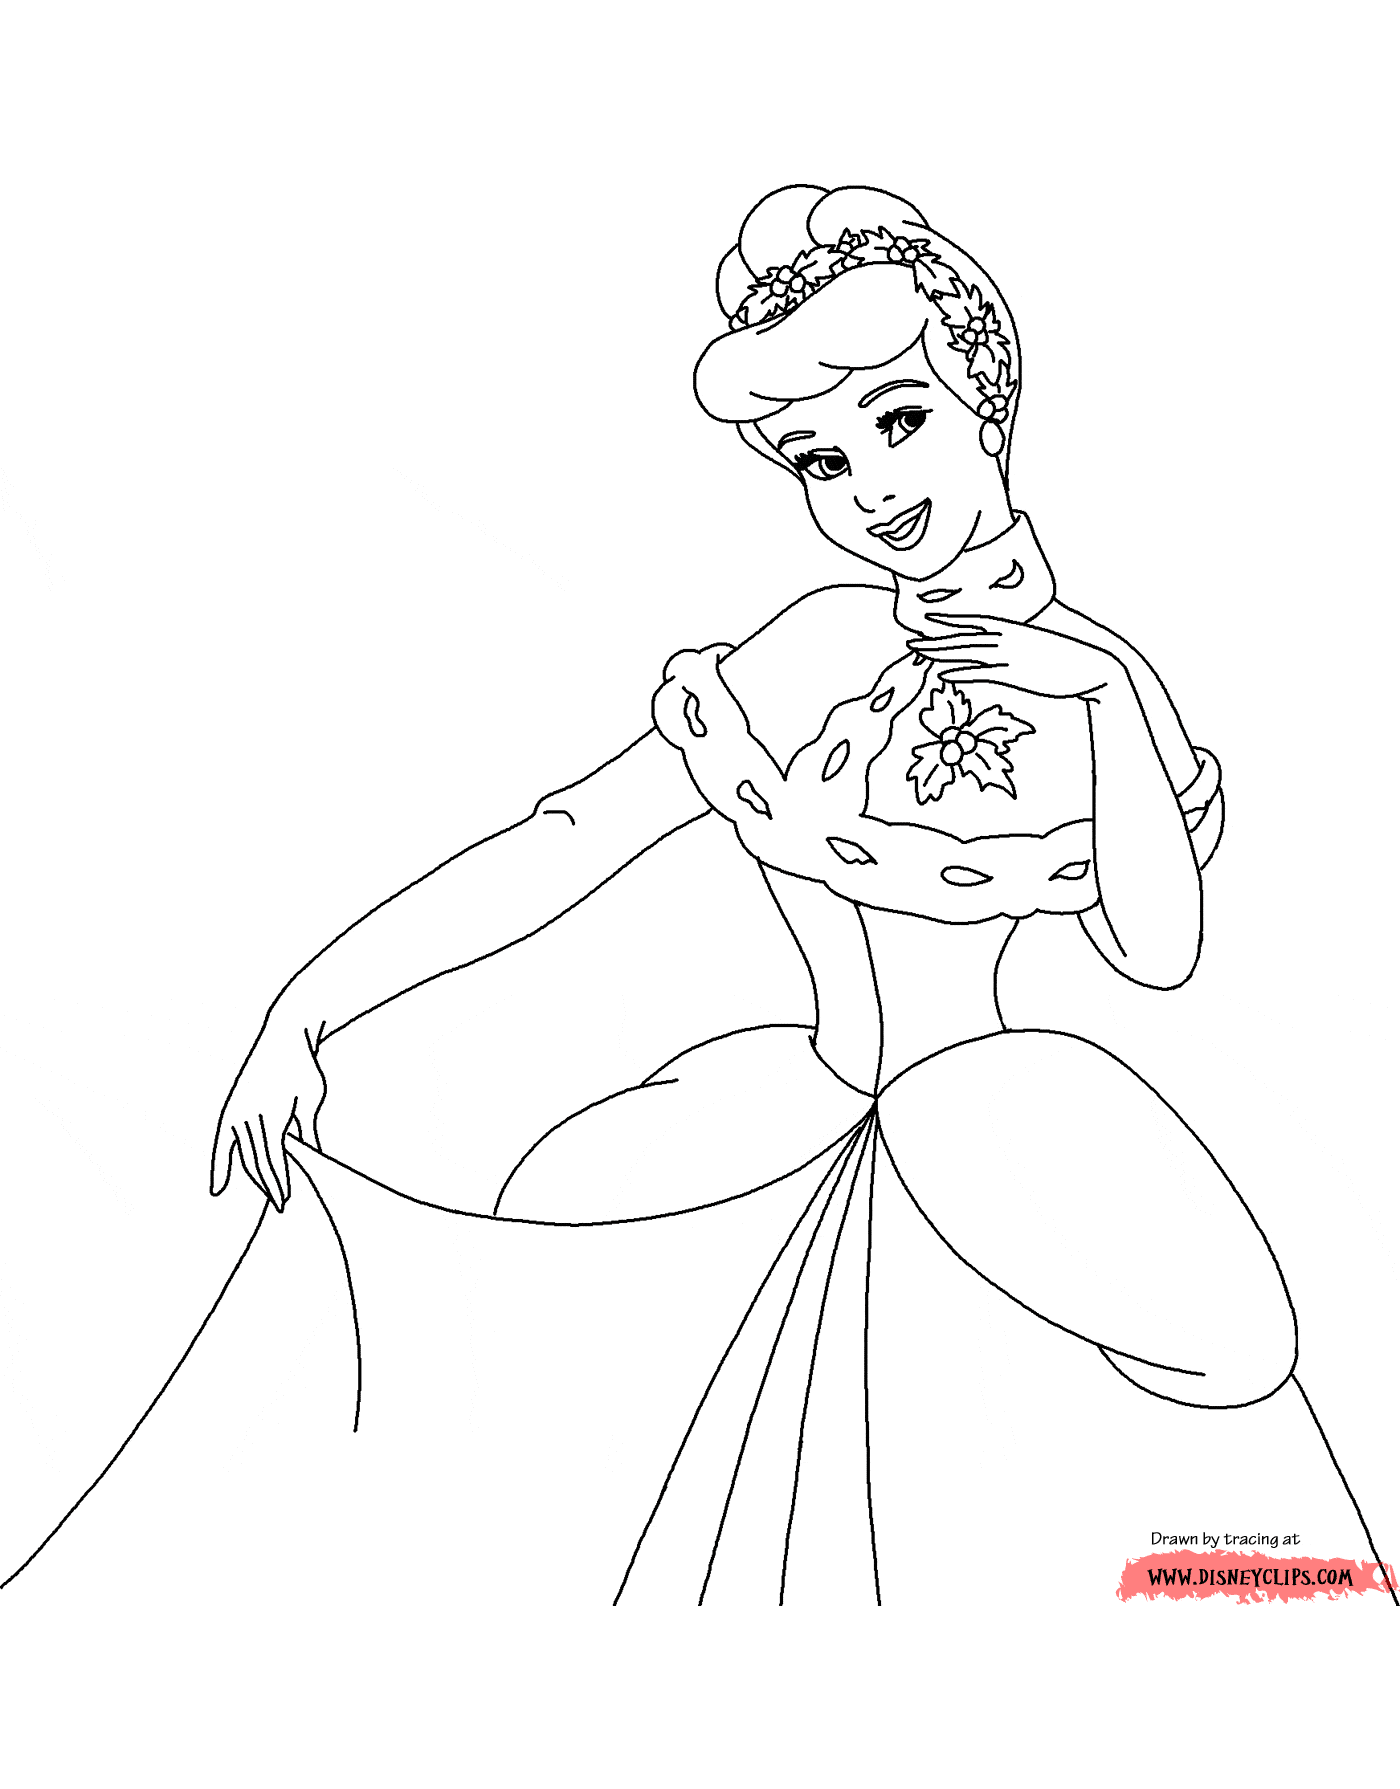 Disney Christmas Coloring Pages 6 | Disneyclips.com